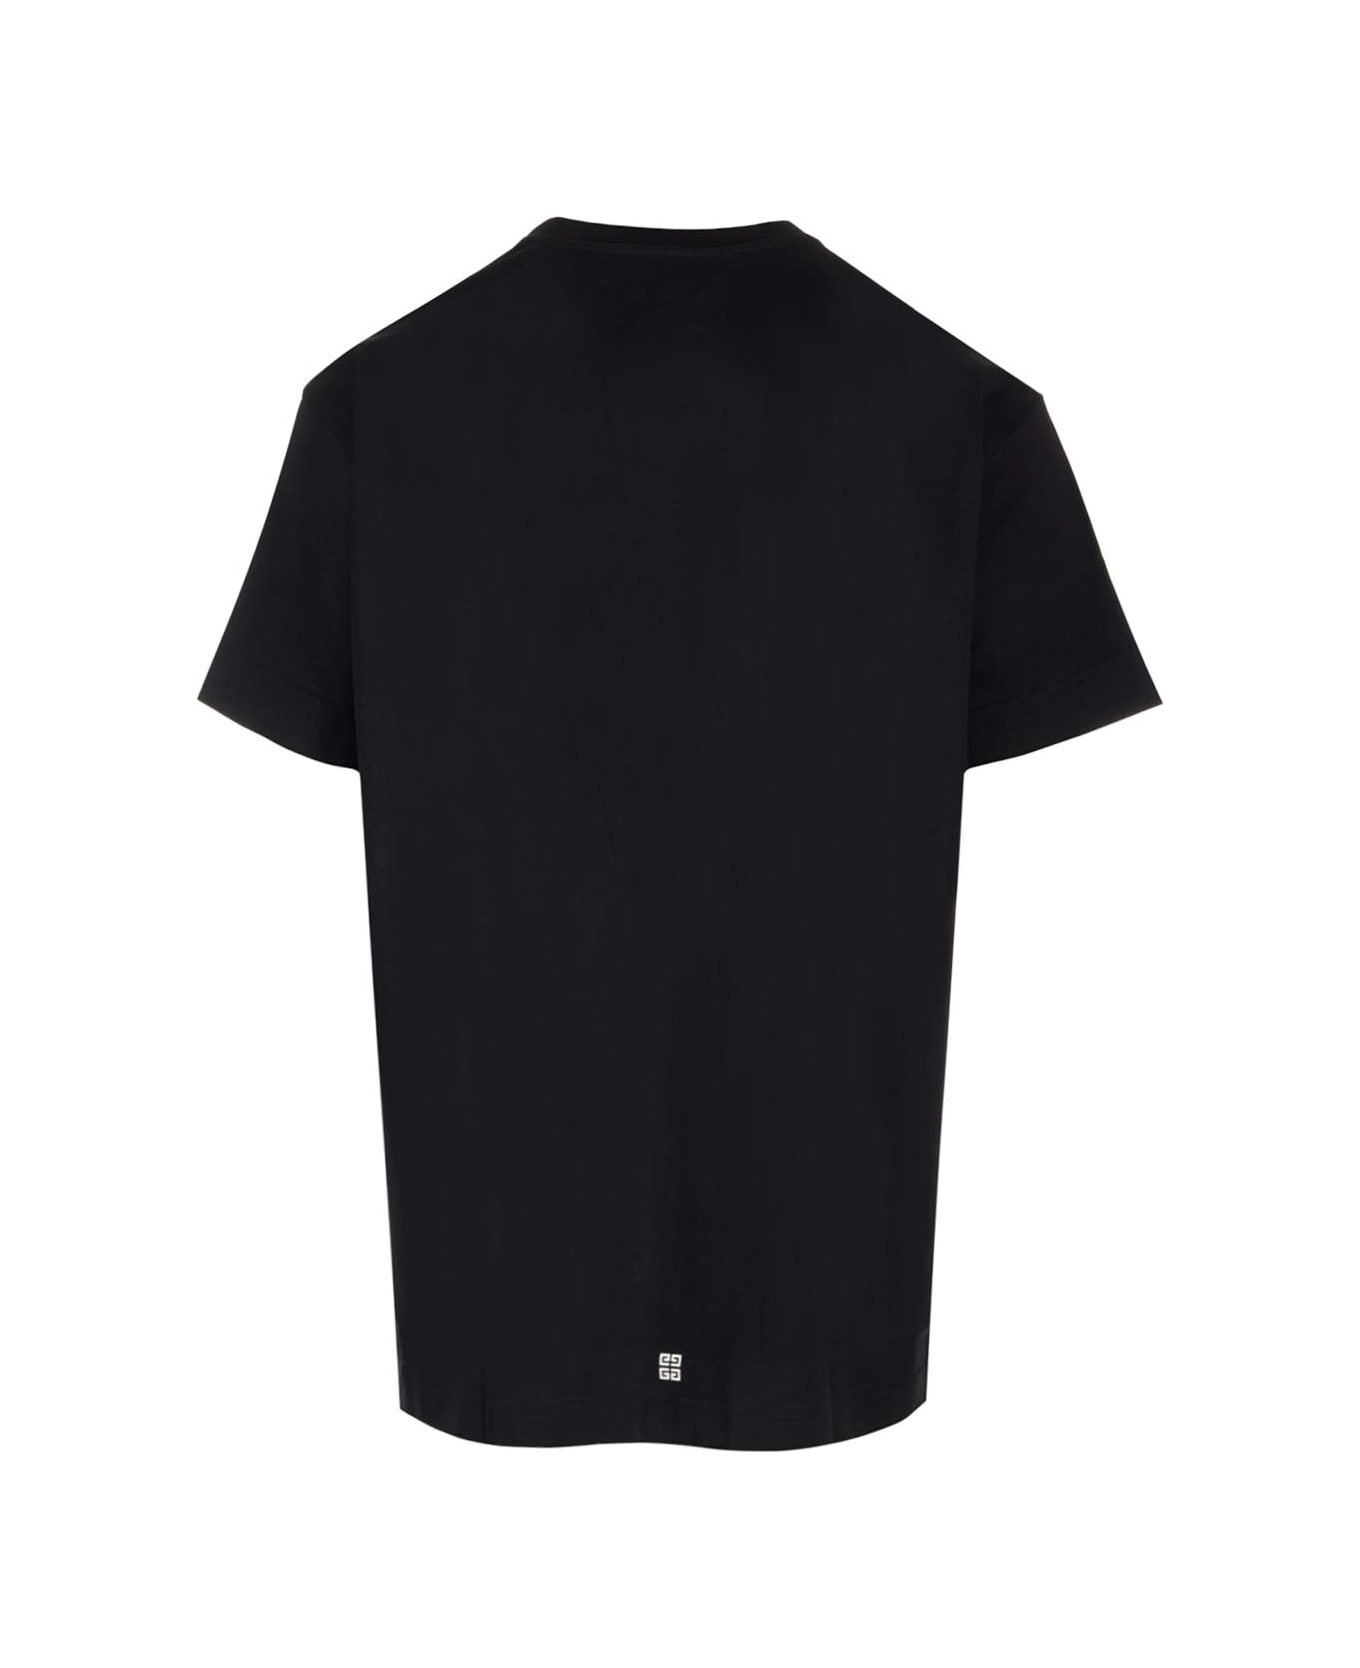 Givenchy Oversized Fit T-shirt - Black